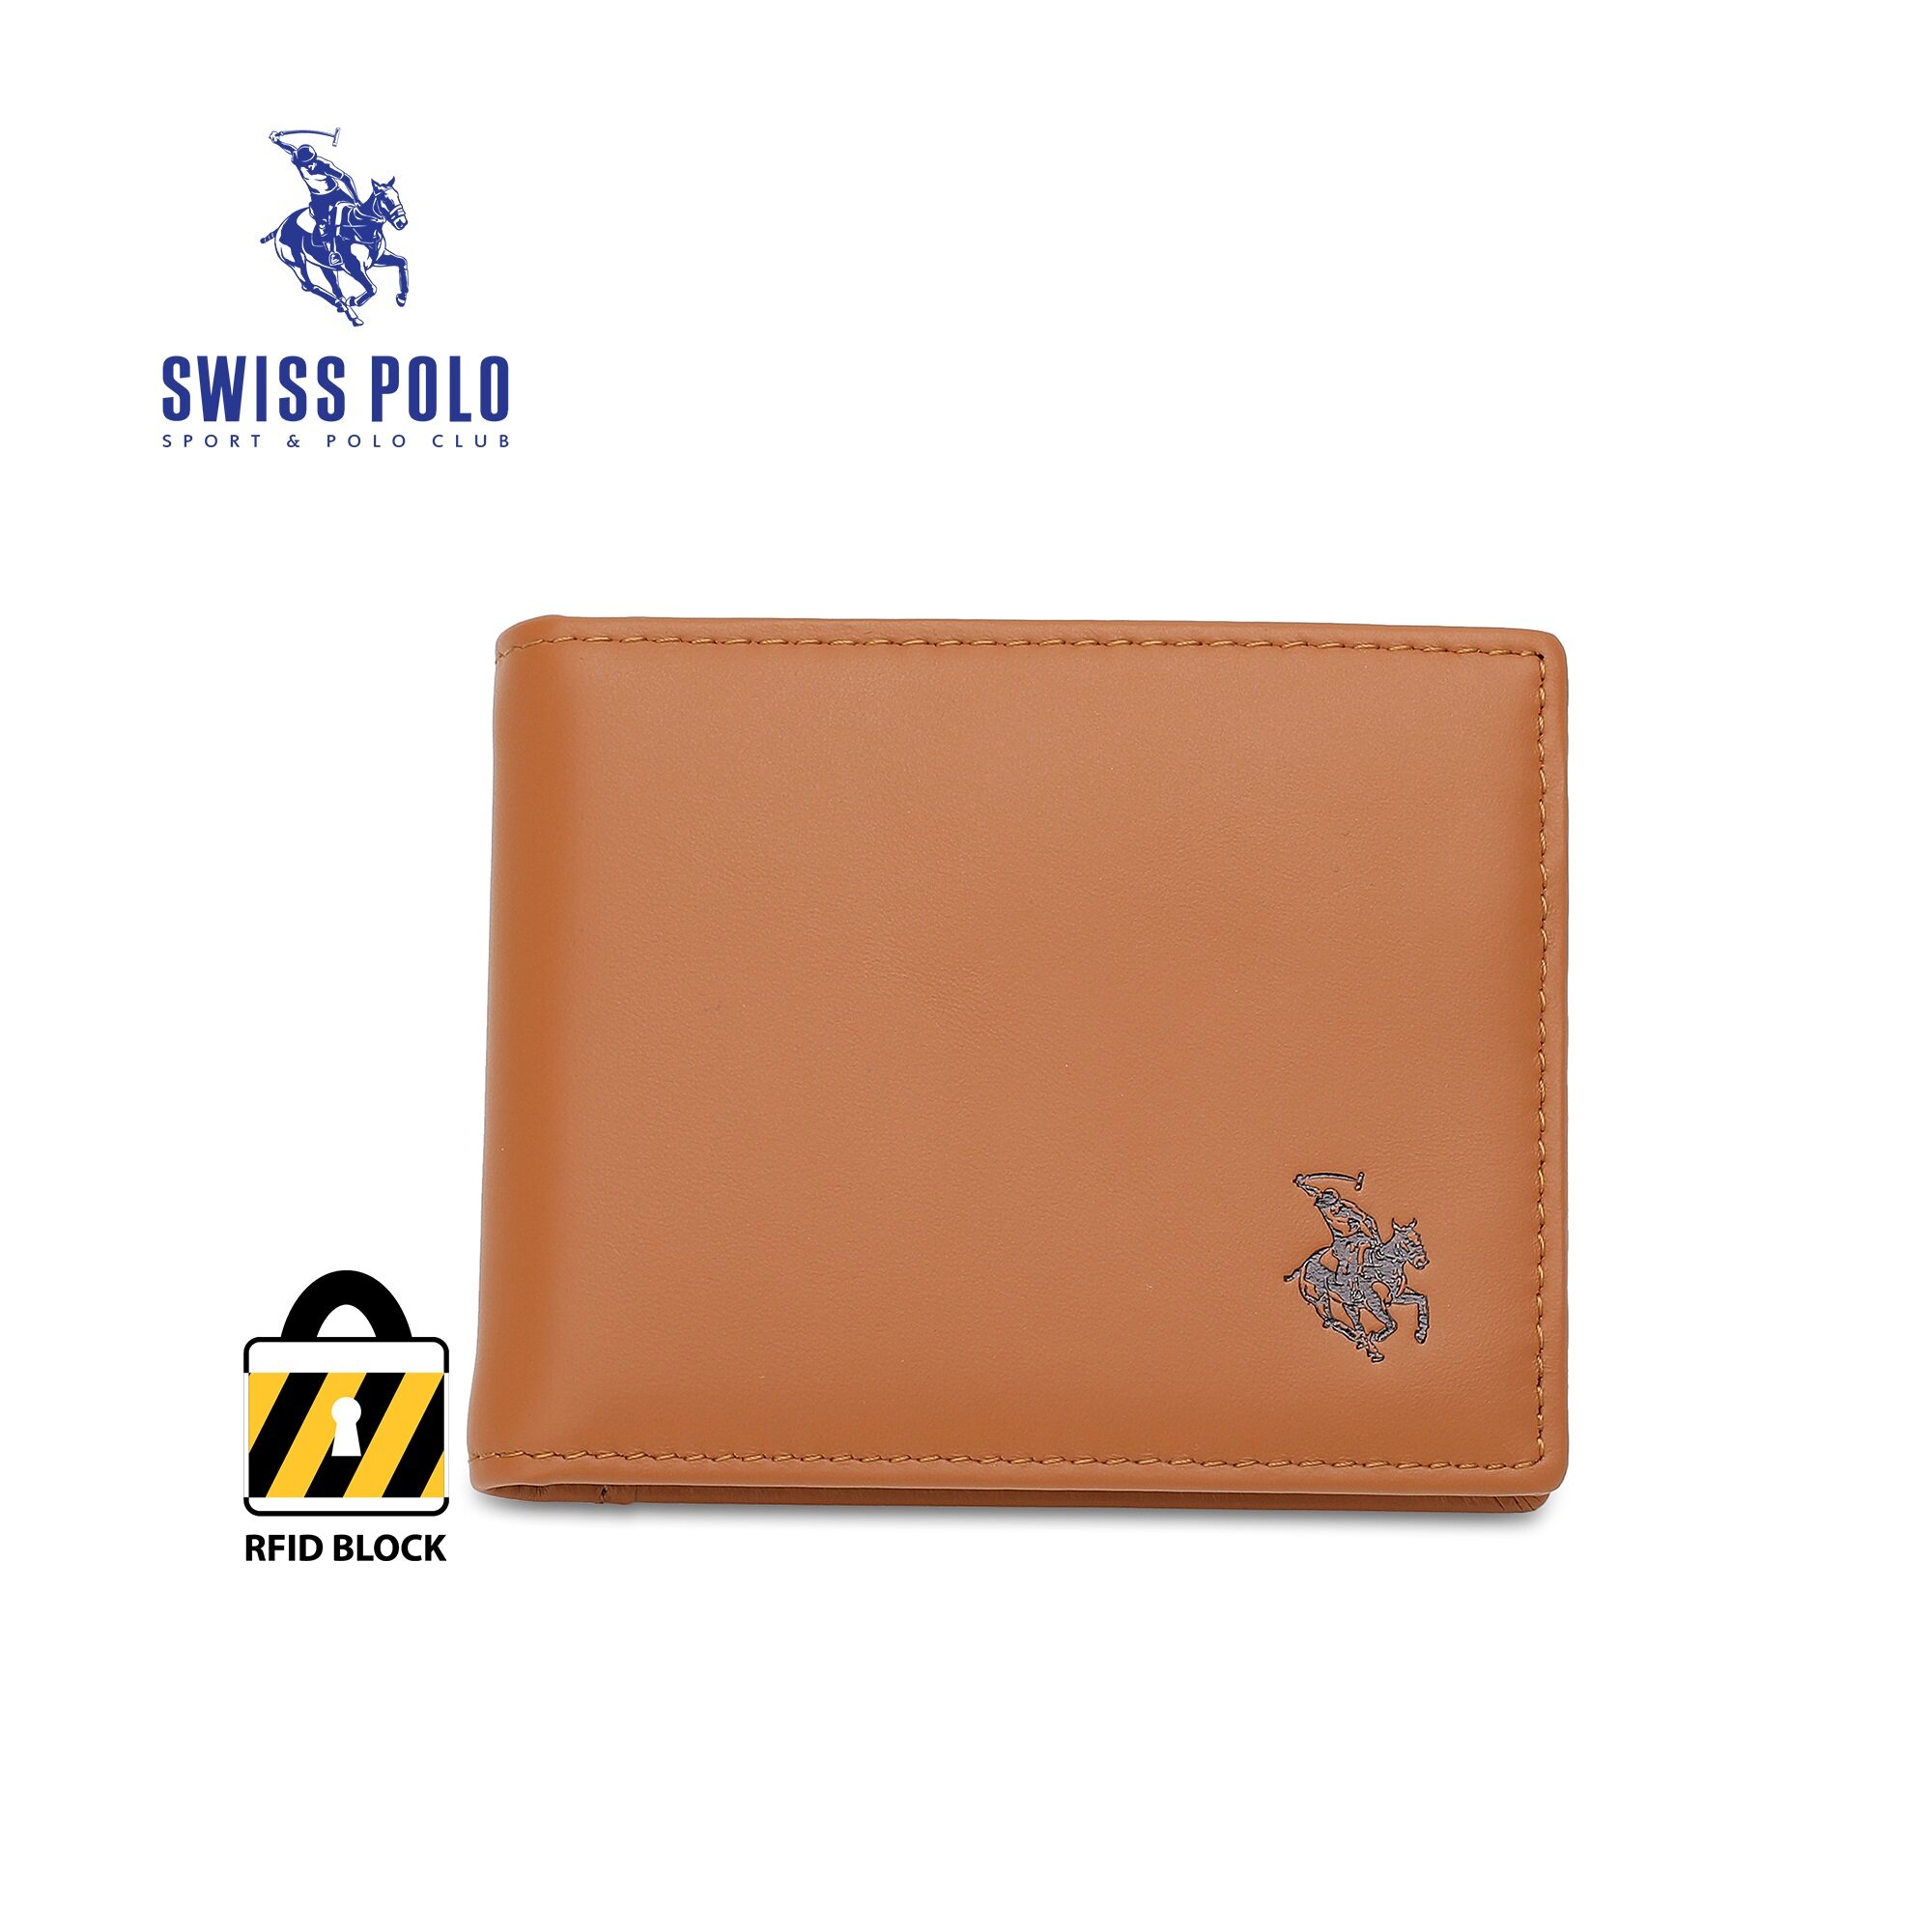 SWISS POLO Genuine Leather RFID Money Clip/Card Holder SW 162-2 BROWN